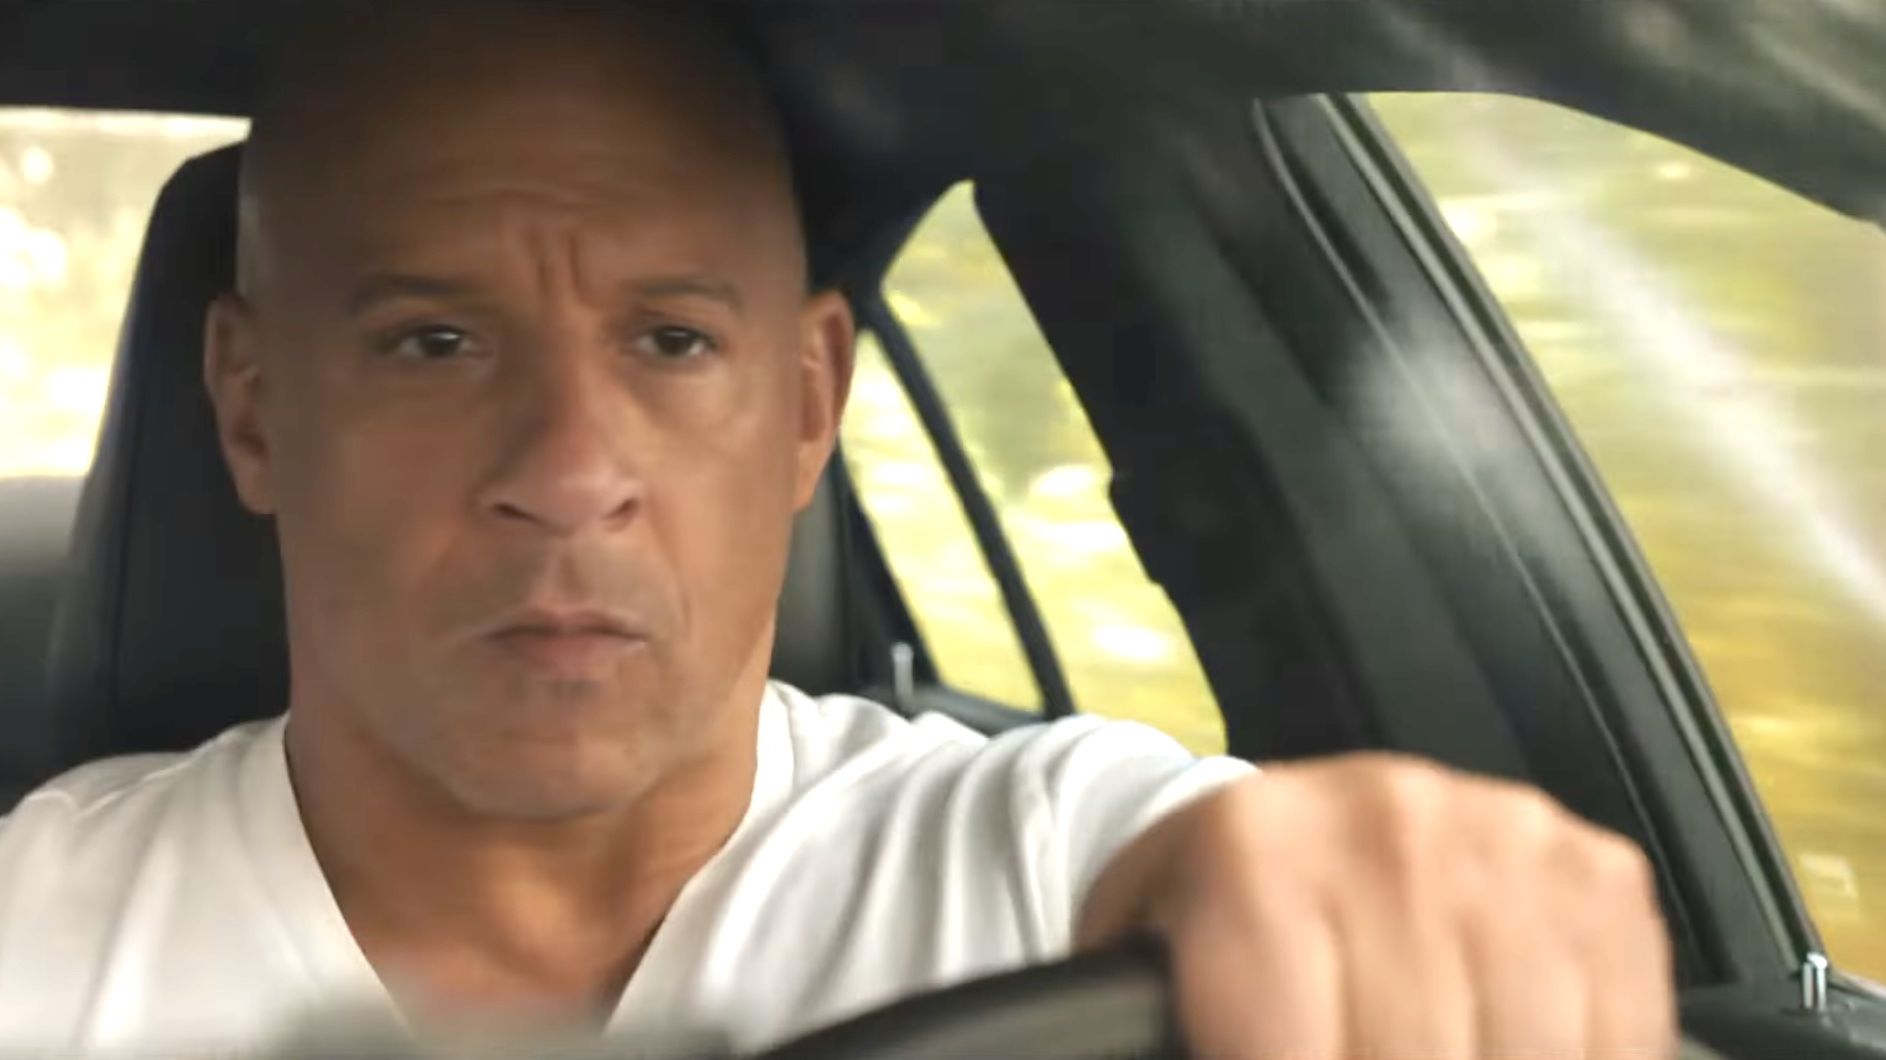 Fast and Furious 9: Where Absurdity and Monotony Meet